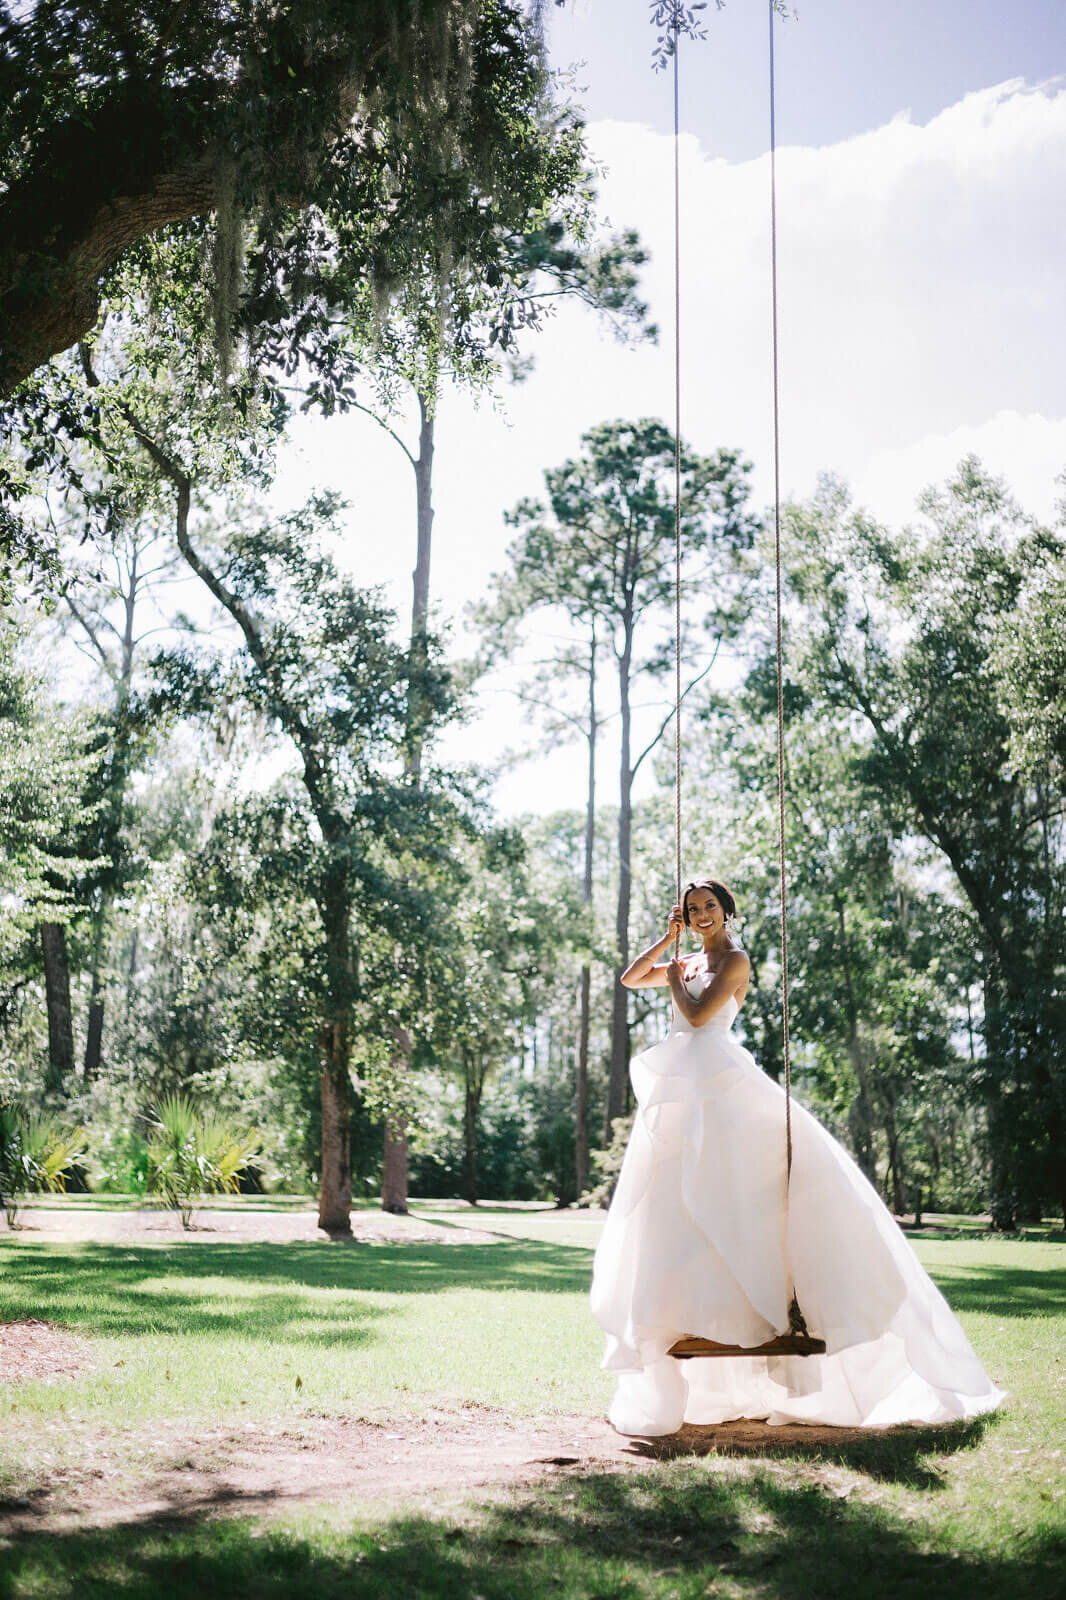 The bride is standing in a swing amongst the trees in Montage at Palmetto Bluff. Destination wedding image by Jenny Fu Studio